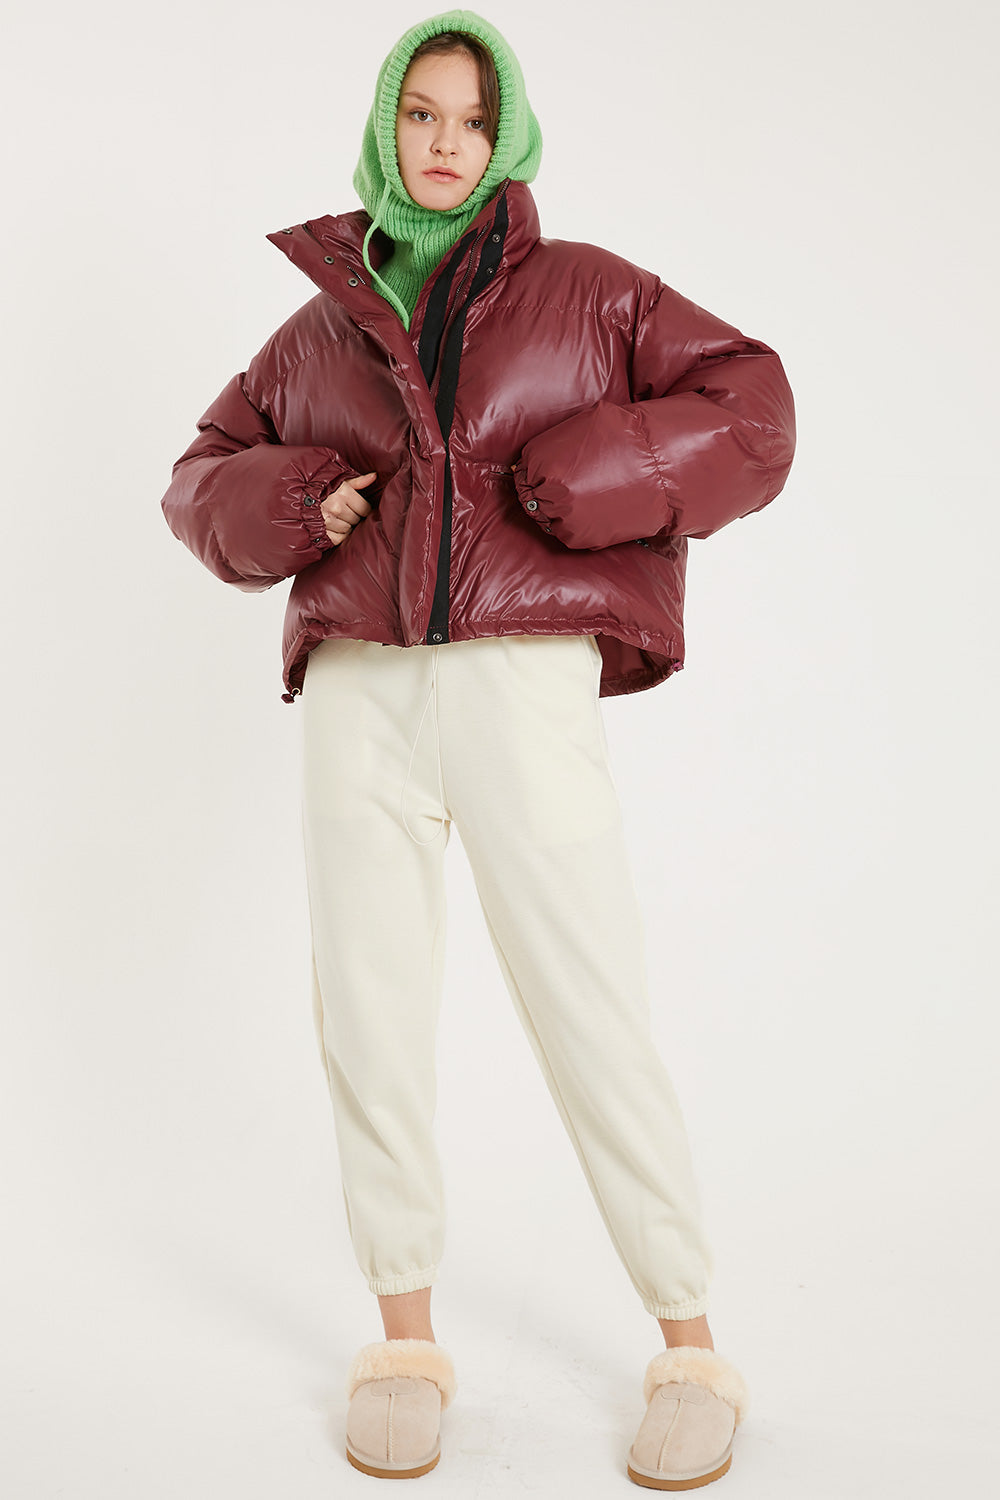 storets.com Harlow Faux Leather Puffer Jacket